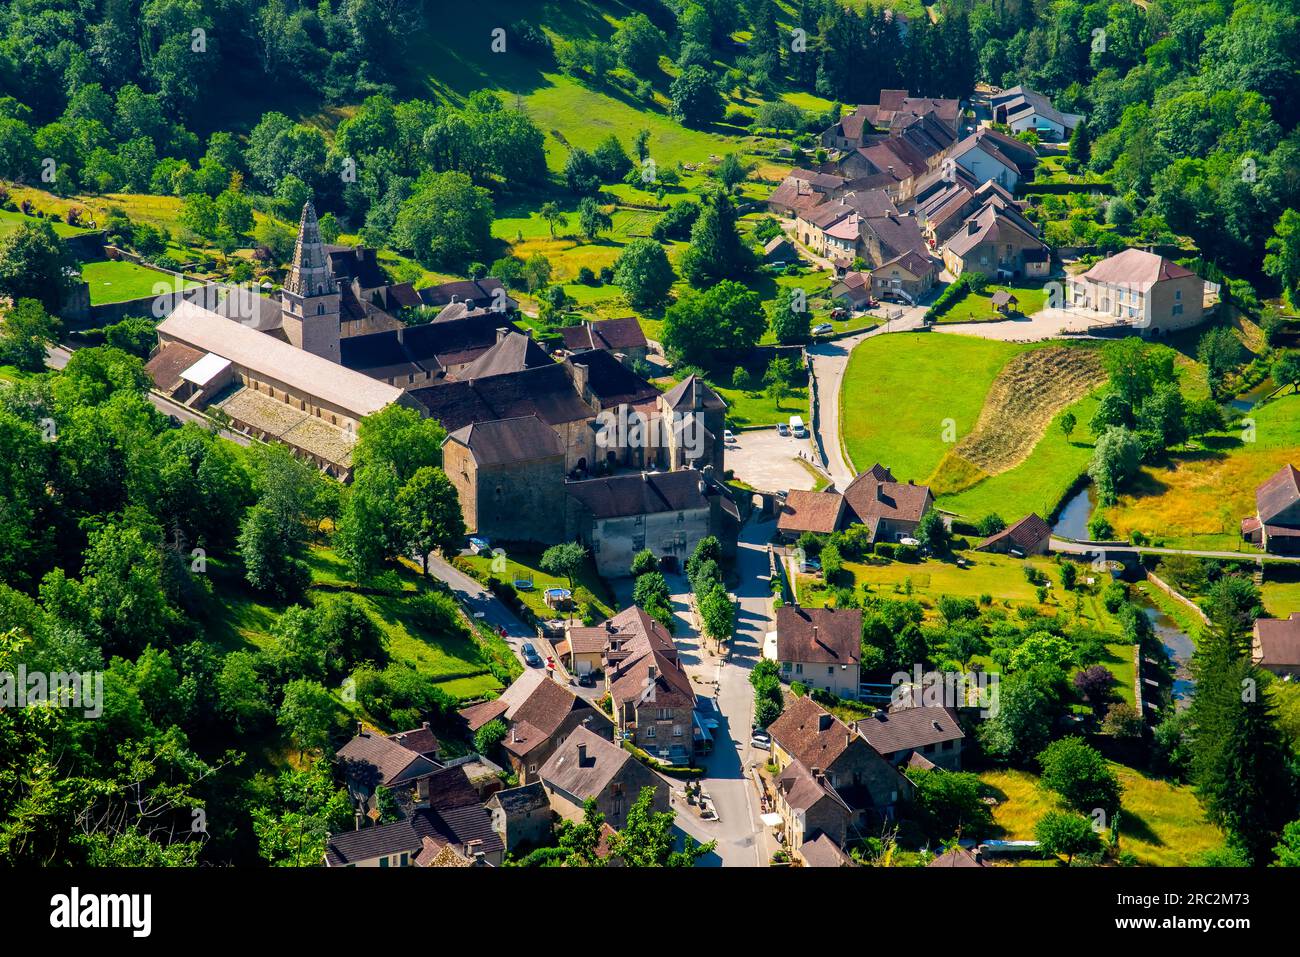 Aerial view over small and beautiful Baume Les Messieurs village nestled in the valley of Jura mountains. Jura department of Franche-Comte, France. Stock Photo